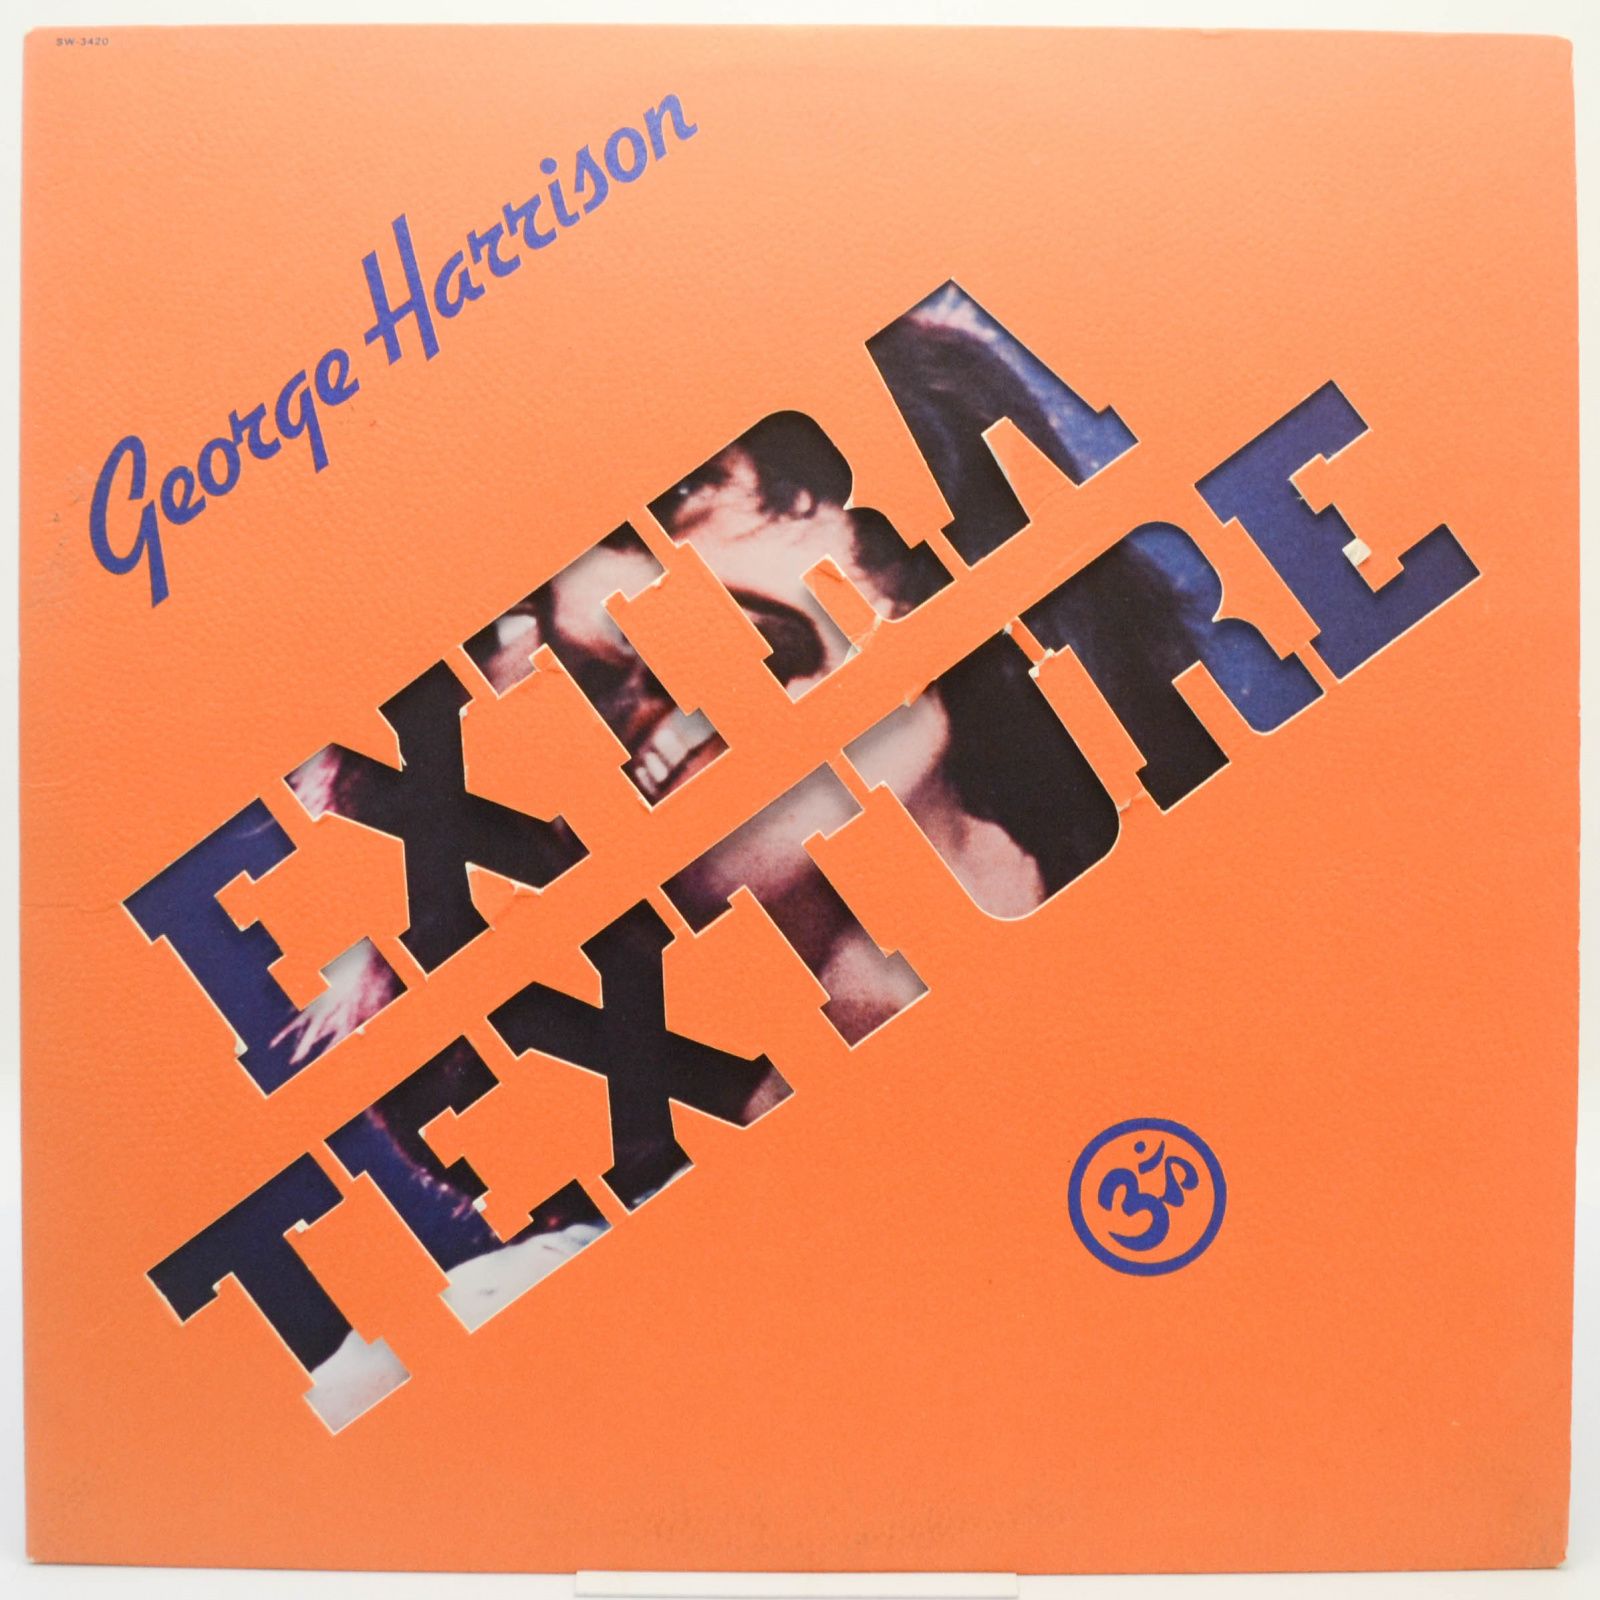 George Harrison — Extra Texture (Read All About It) (USA), 1975